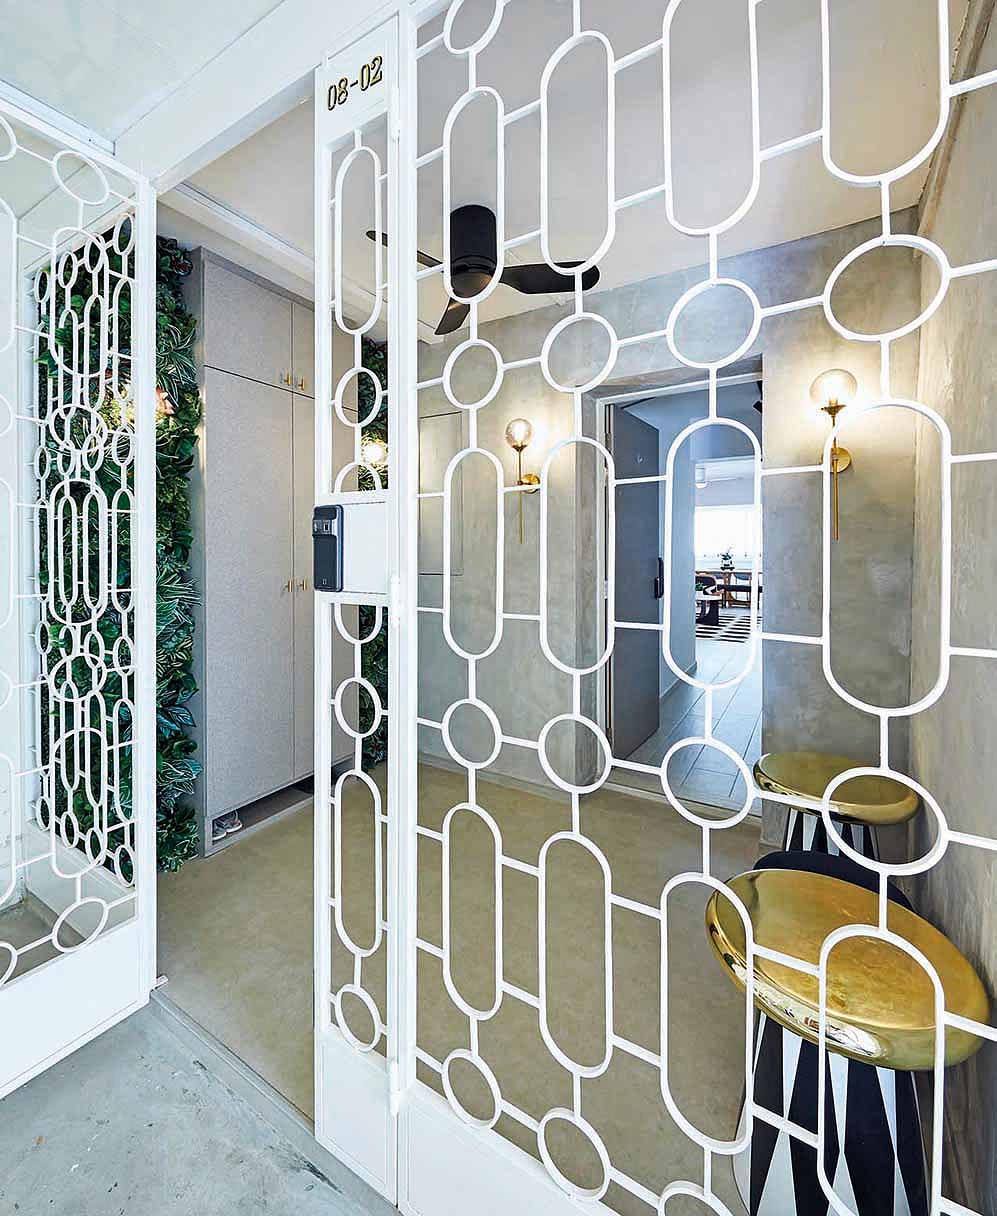 The recess area was transformed into a foyer encased in geometric grill.